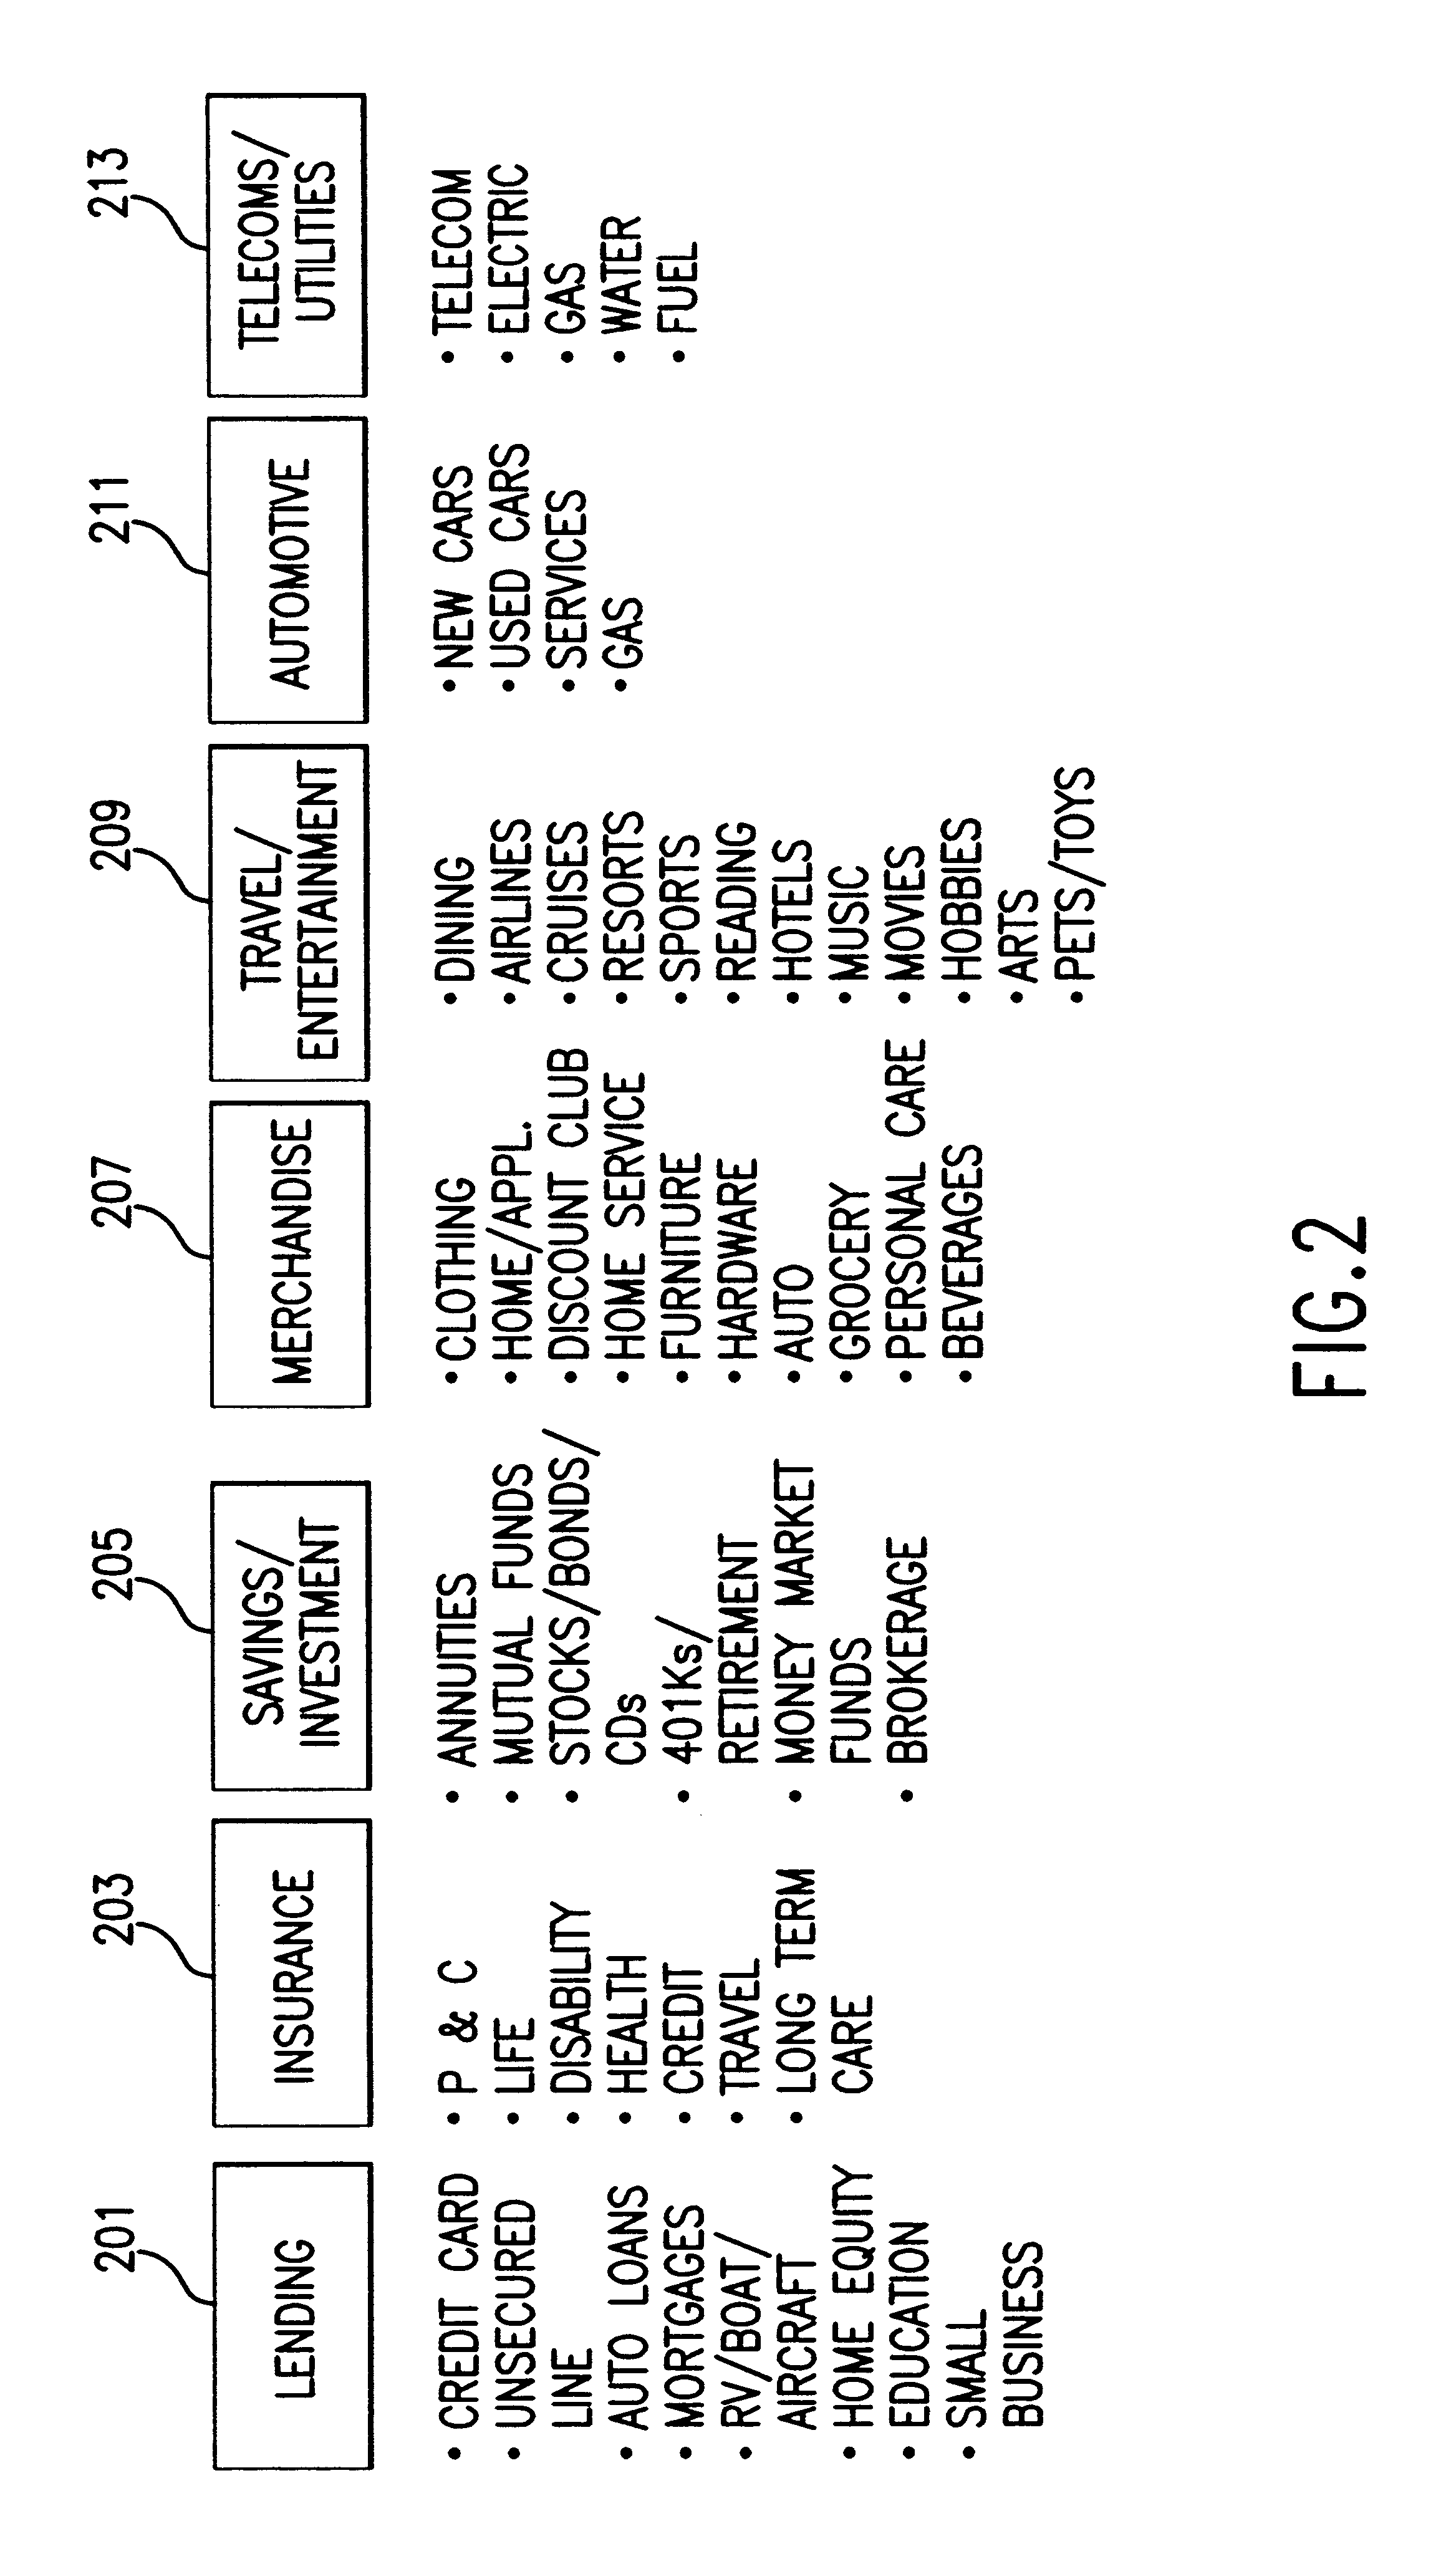 System and method of targeted marketing